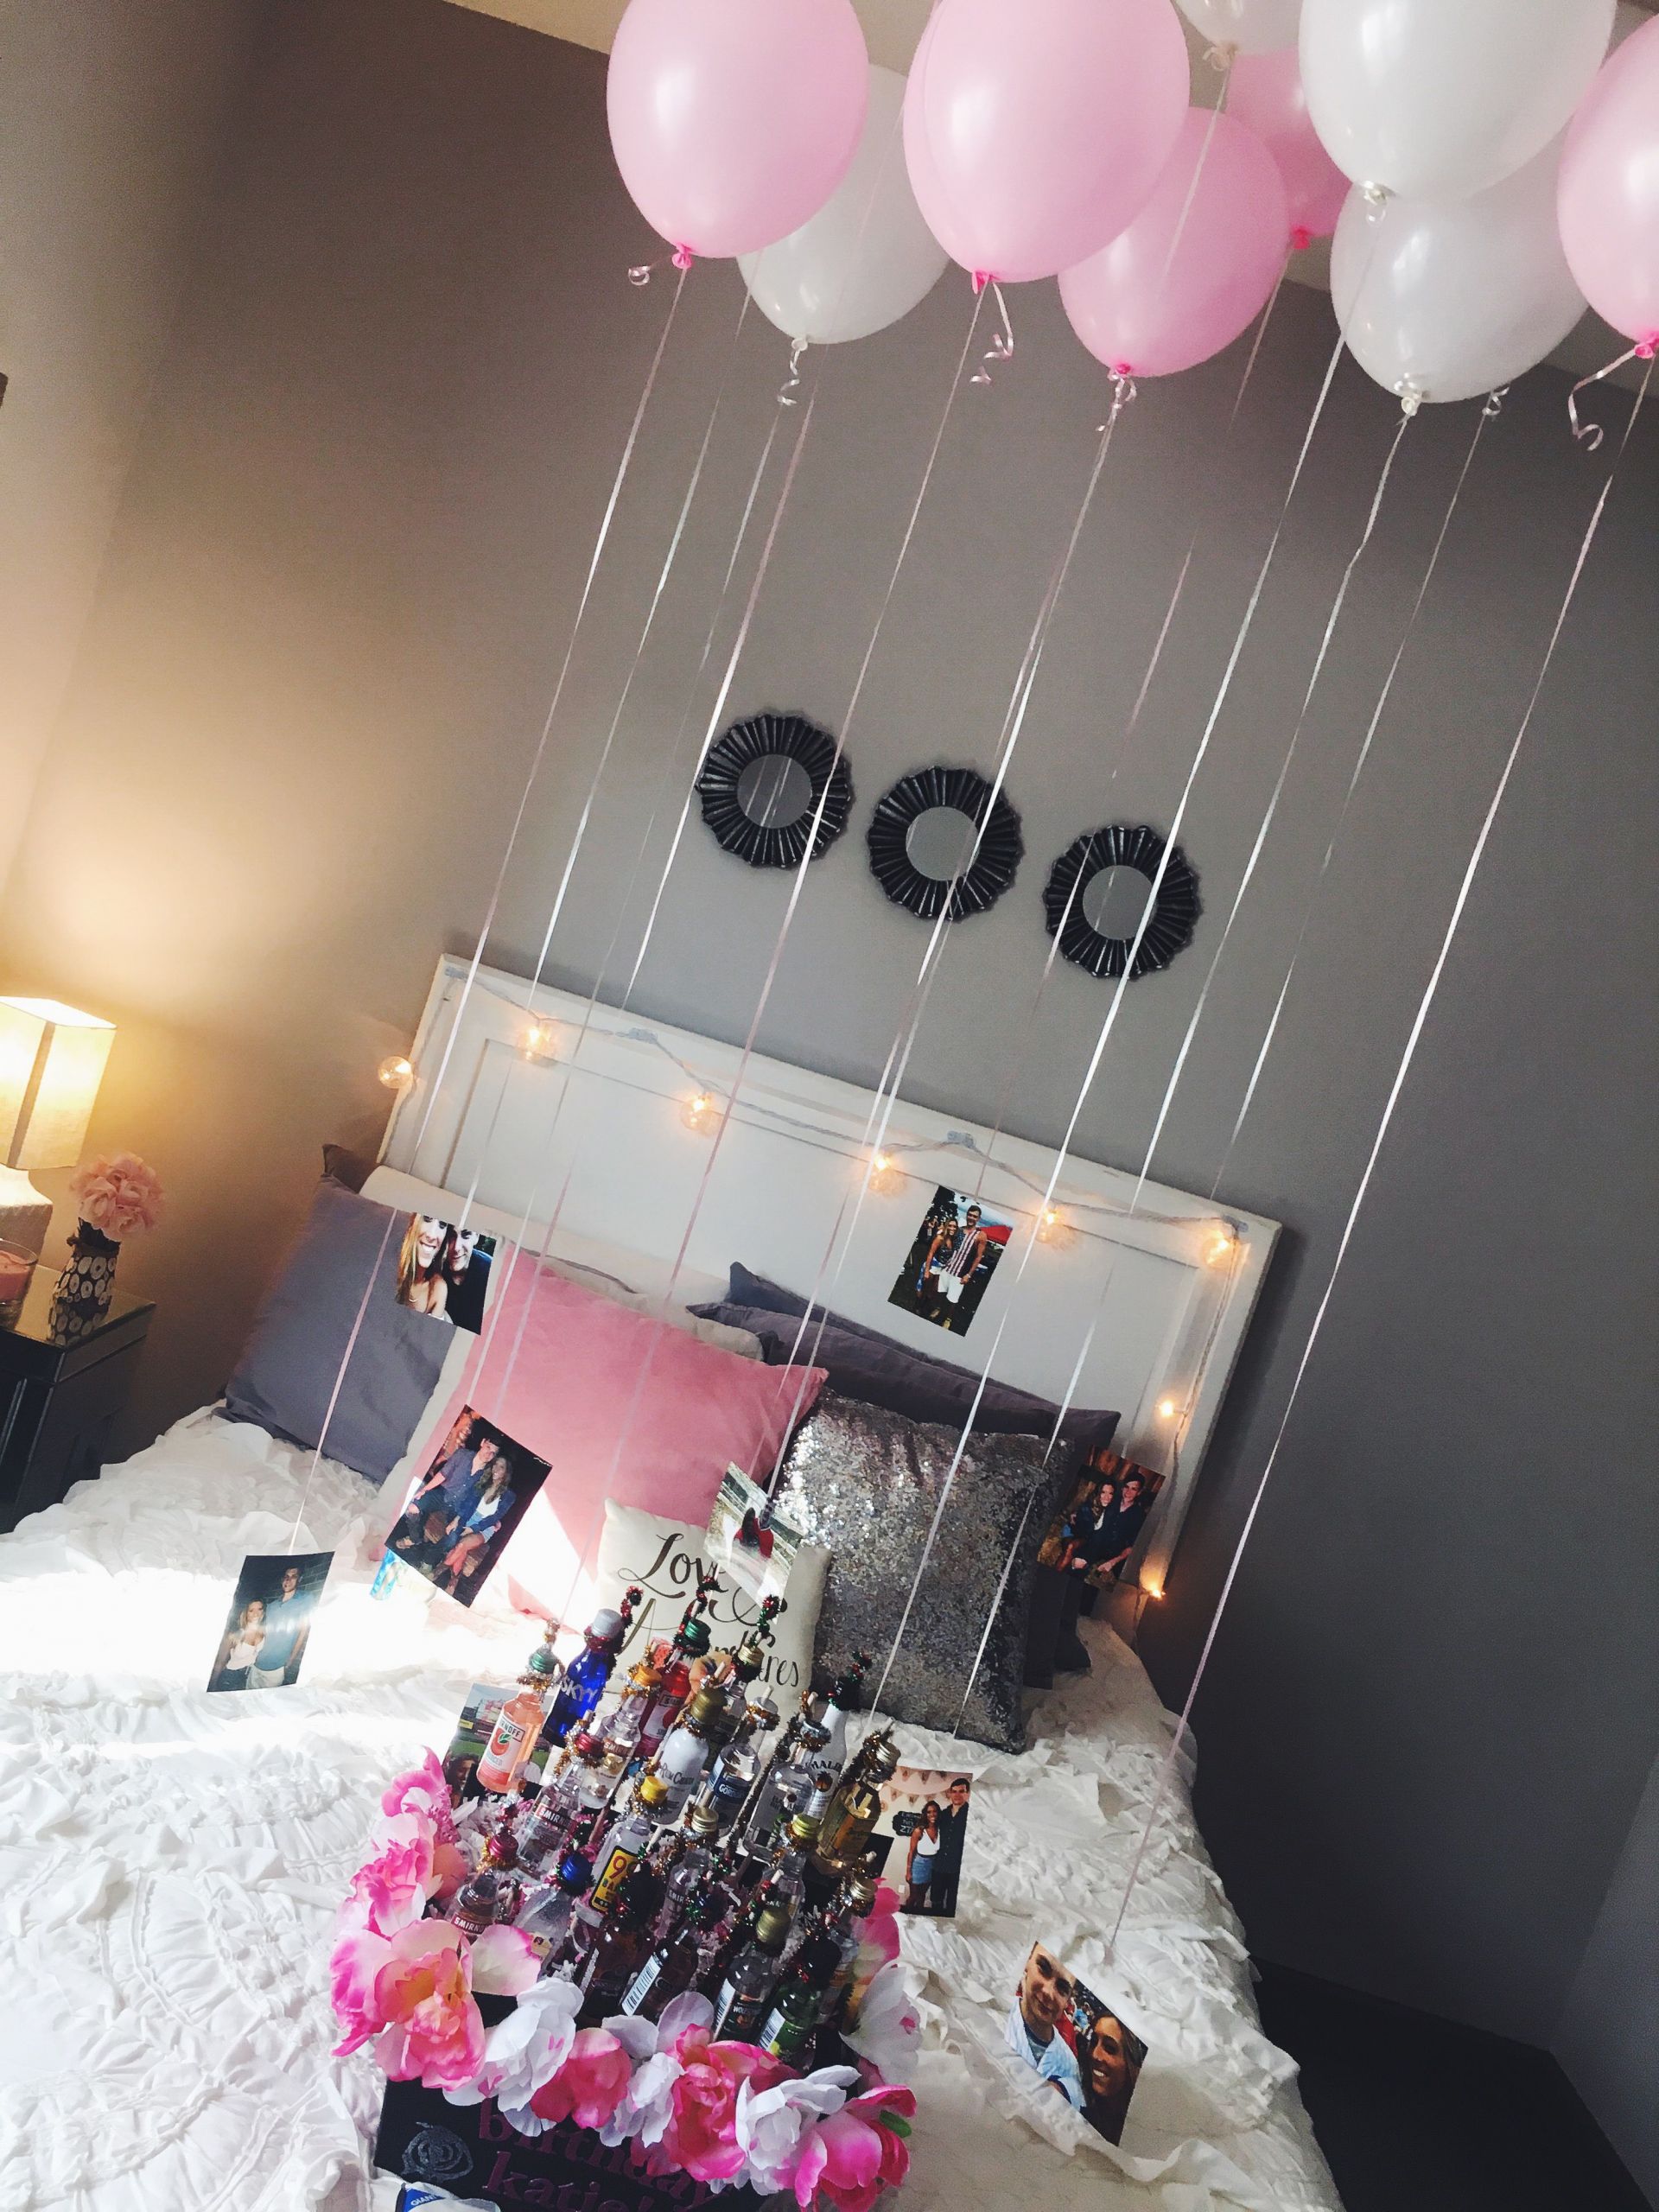 Birthday Gift Ideas For New Girlfriend
 easy and cute decorations for a friend or girlfriends 21st